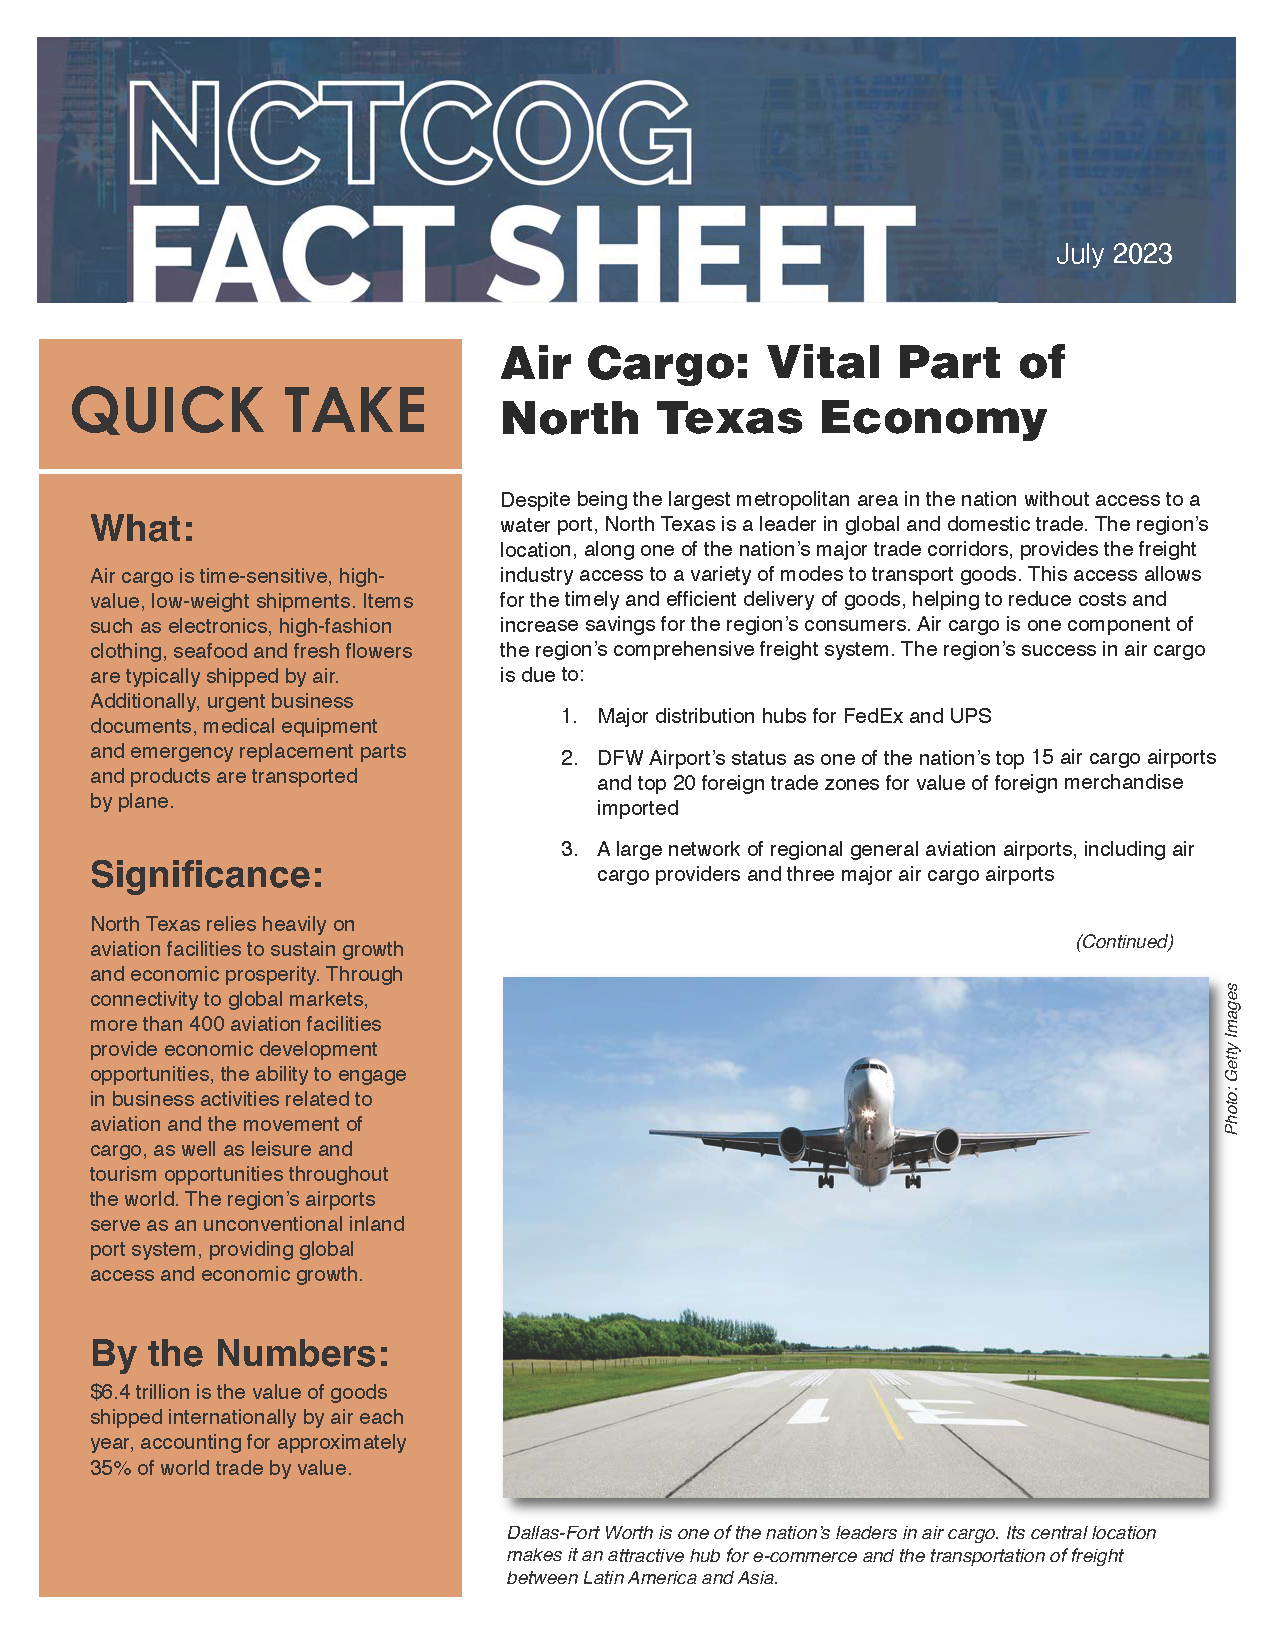 An image of the front page of the air cargo fact sheet